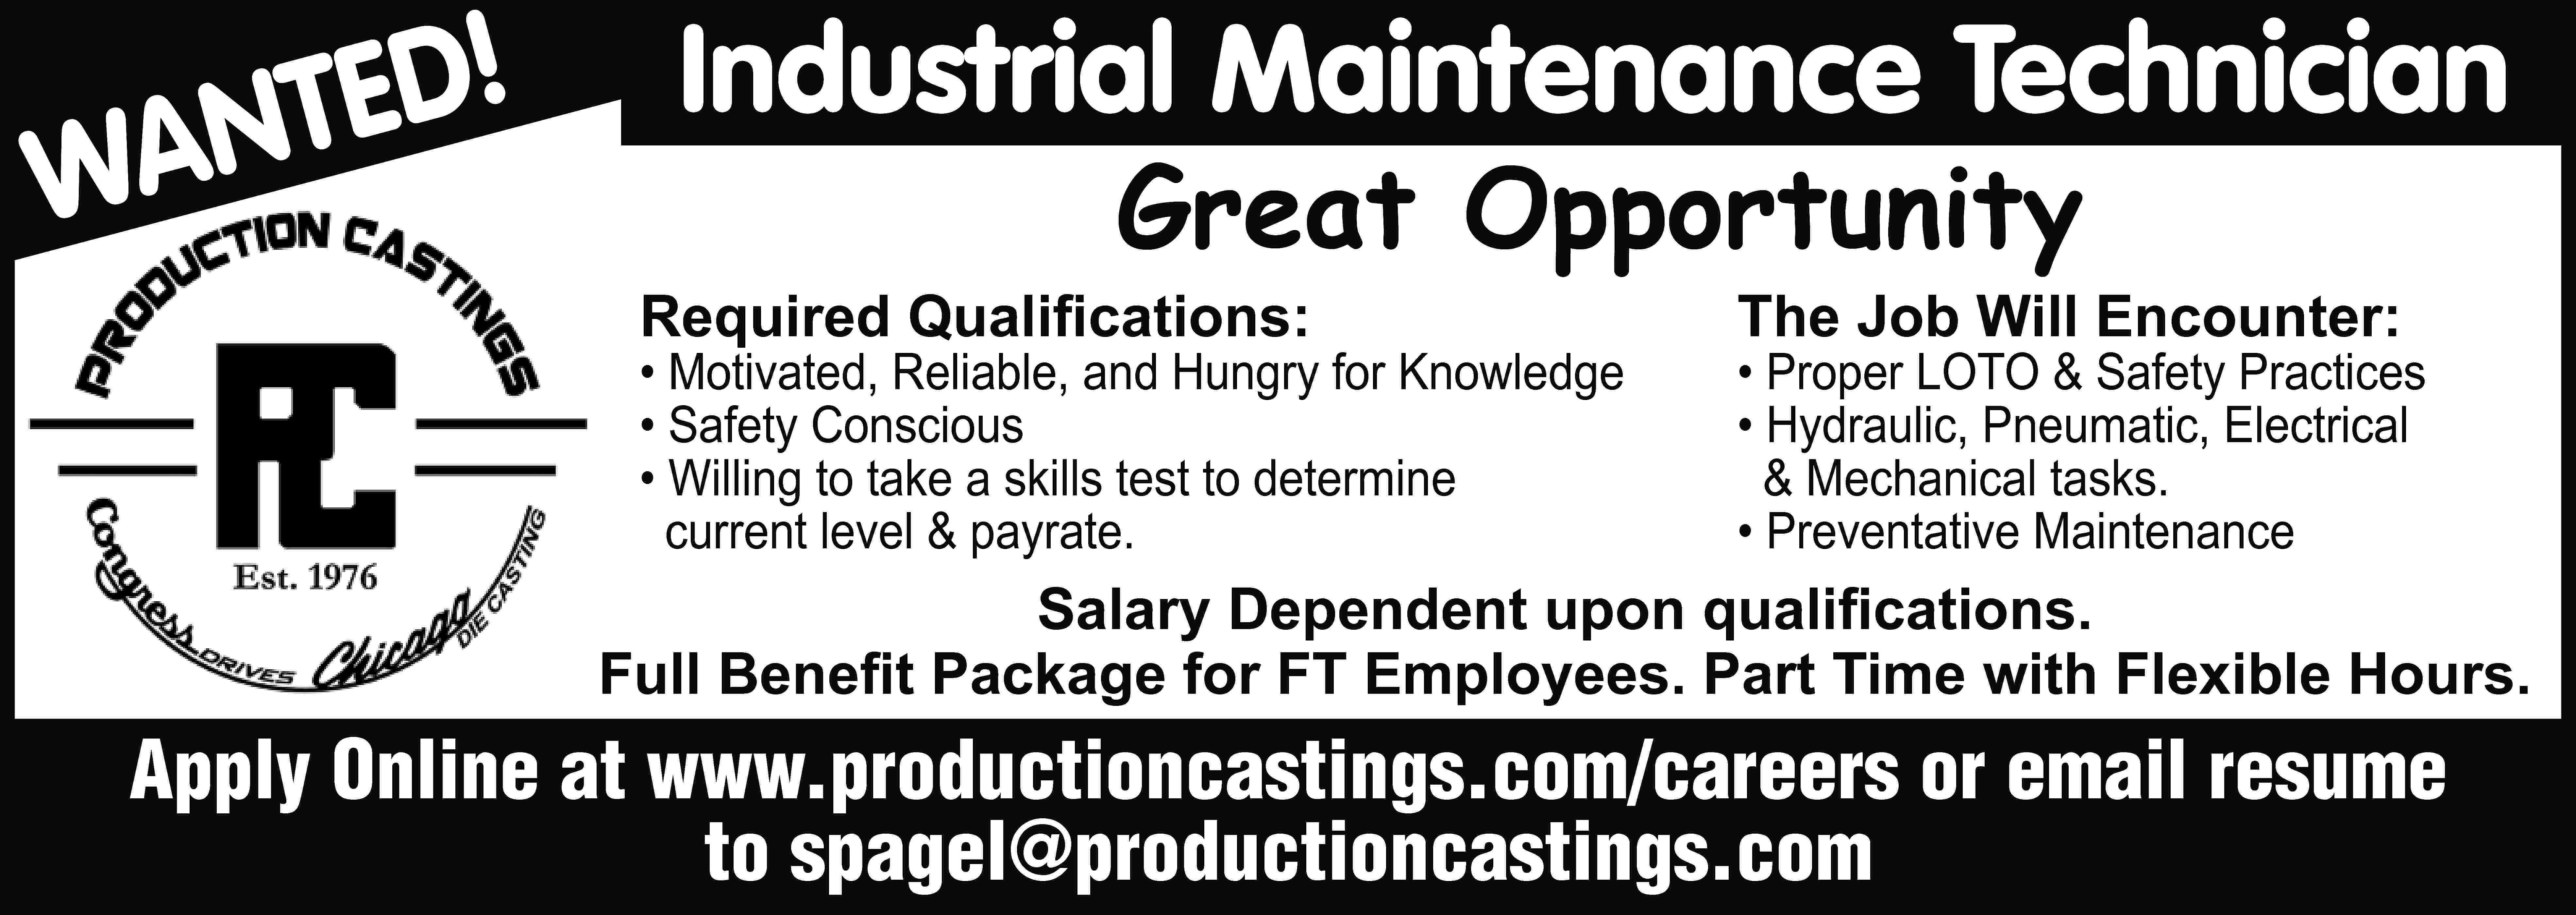 D! TE WAN Industrial Maintenance  D! TE WAN Industrial Maintenance Technician Great Opportunity Required Qualifications: • Motivated, Reliable, and Hungry for Knowledge • Safety Conscious • Willing to take a skills test to determine current level & payrate. The Job Will Encounter: • Proper LOTO & Safety Practices • Hydraulic, Pneumatic, Electrical & Mechanical tasks. • Preventative Maintenance Salary Dependent upon qualifications. Full Benefit Package for FT Employees. Part Time with Flexible Hours. Apply Online at www.productioncastings.com/careers or email resume to spagel@productioncastings.com